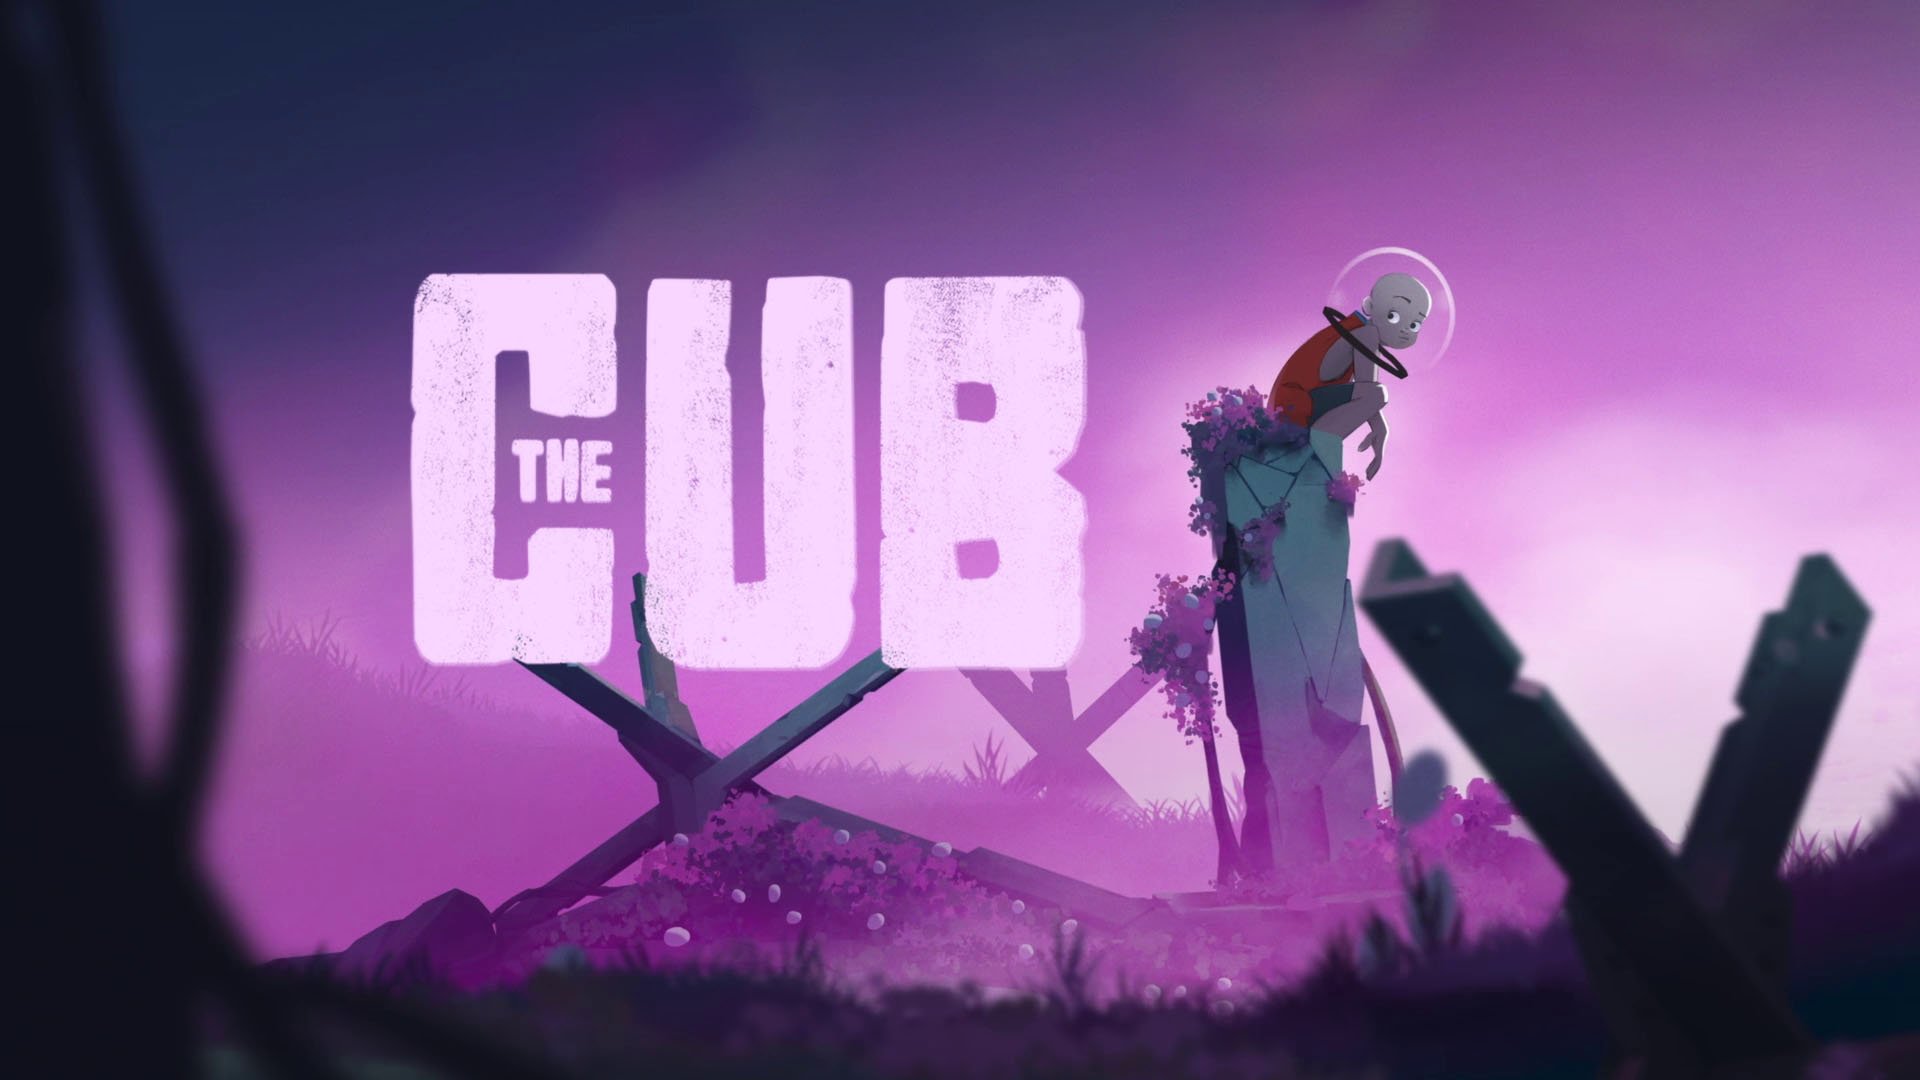 #
      Classics-inspired platformer The Cub announced for PS5, Xbox Series, PS4, Xbox One, Switch, and PC